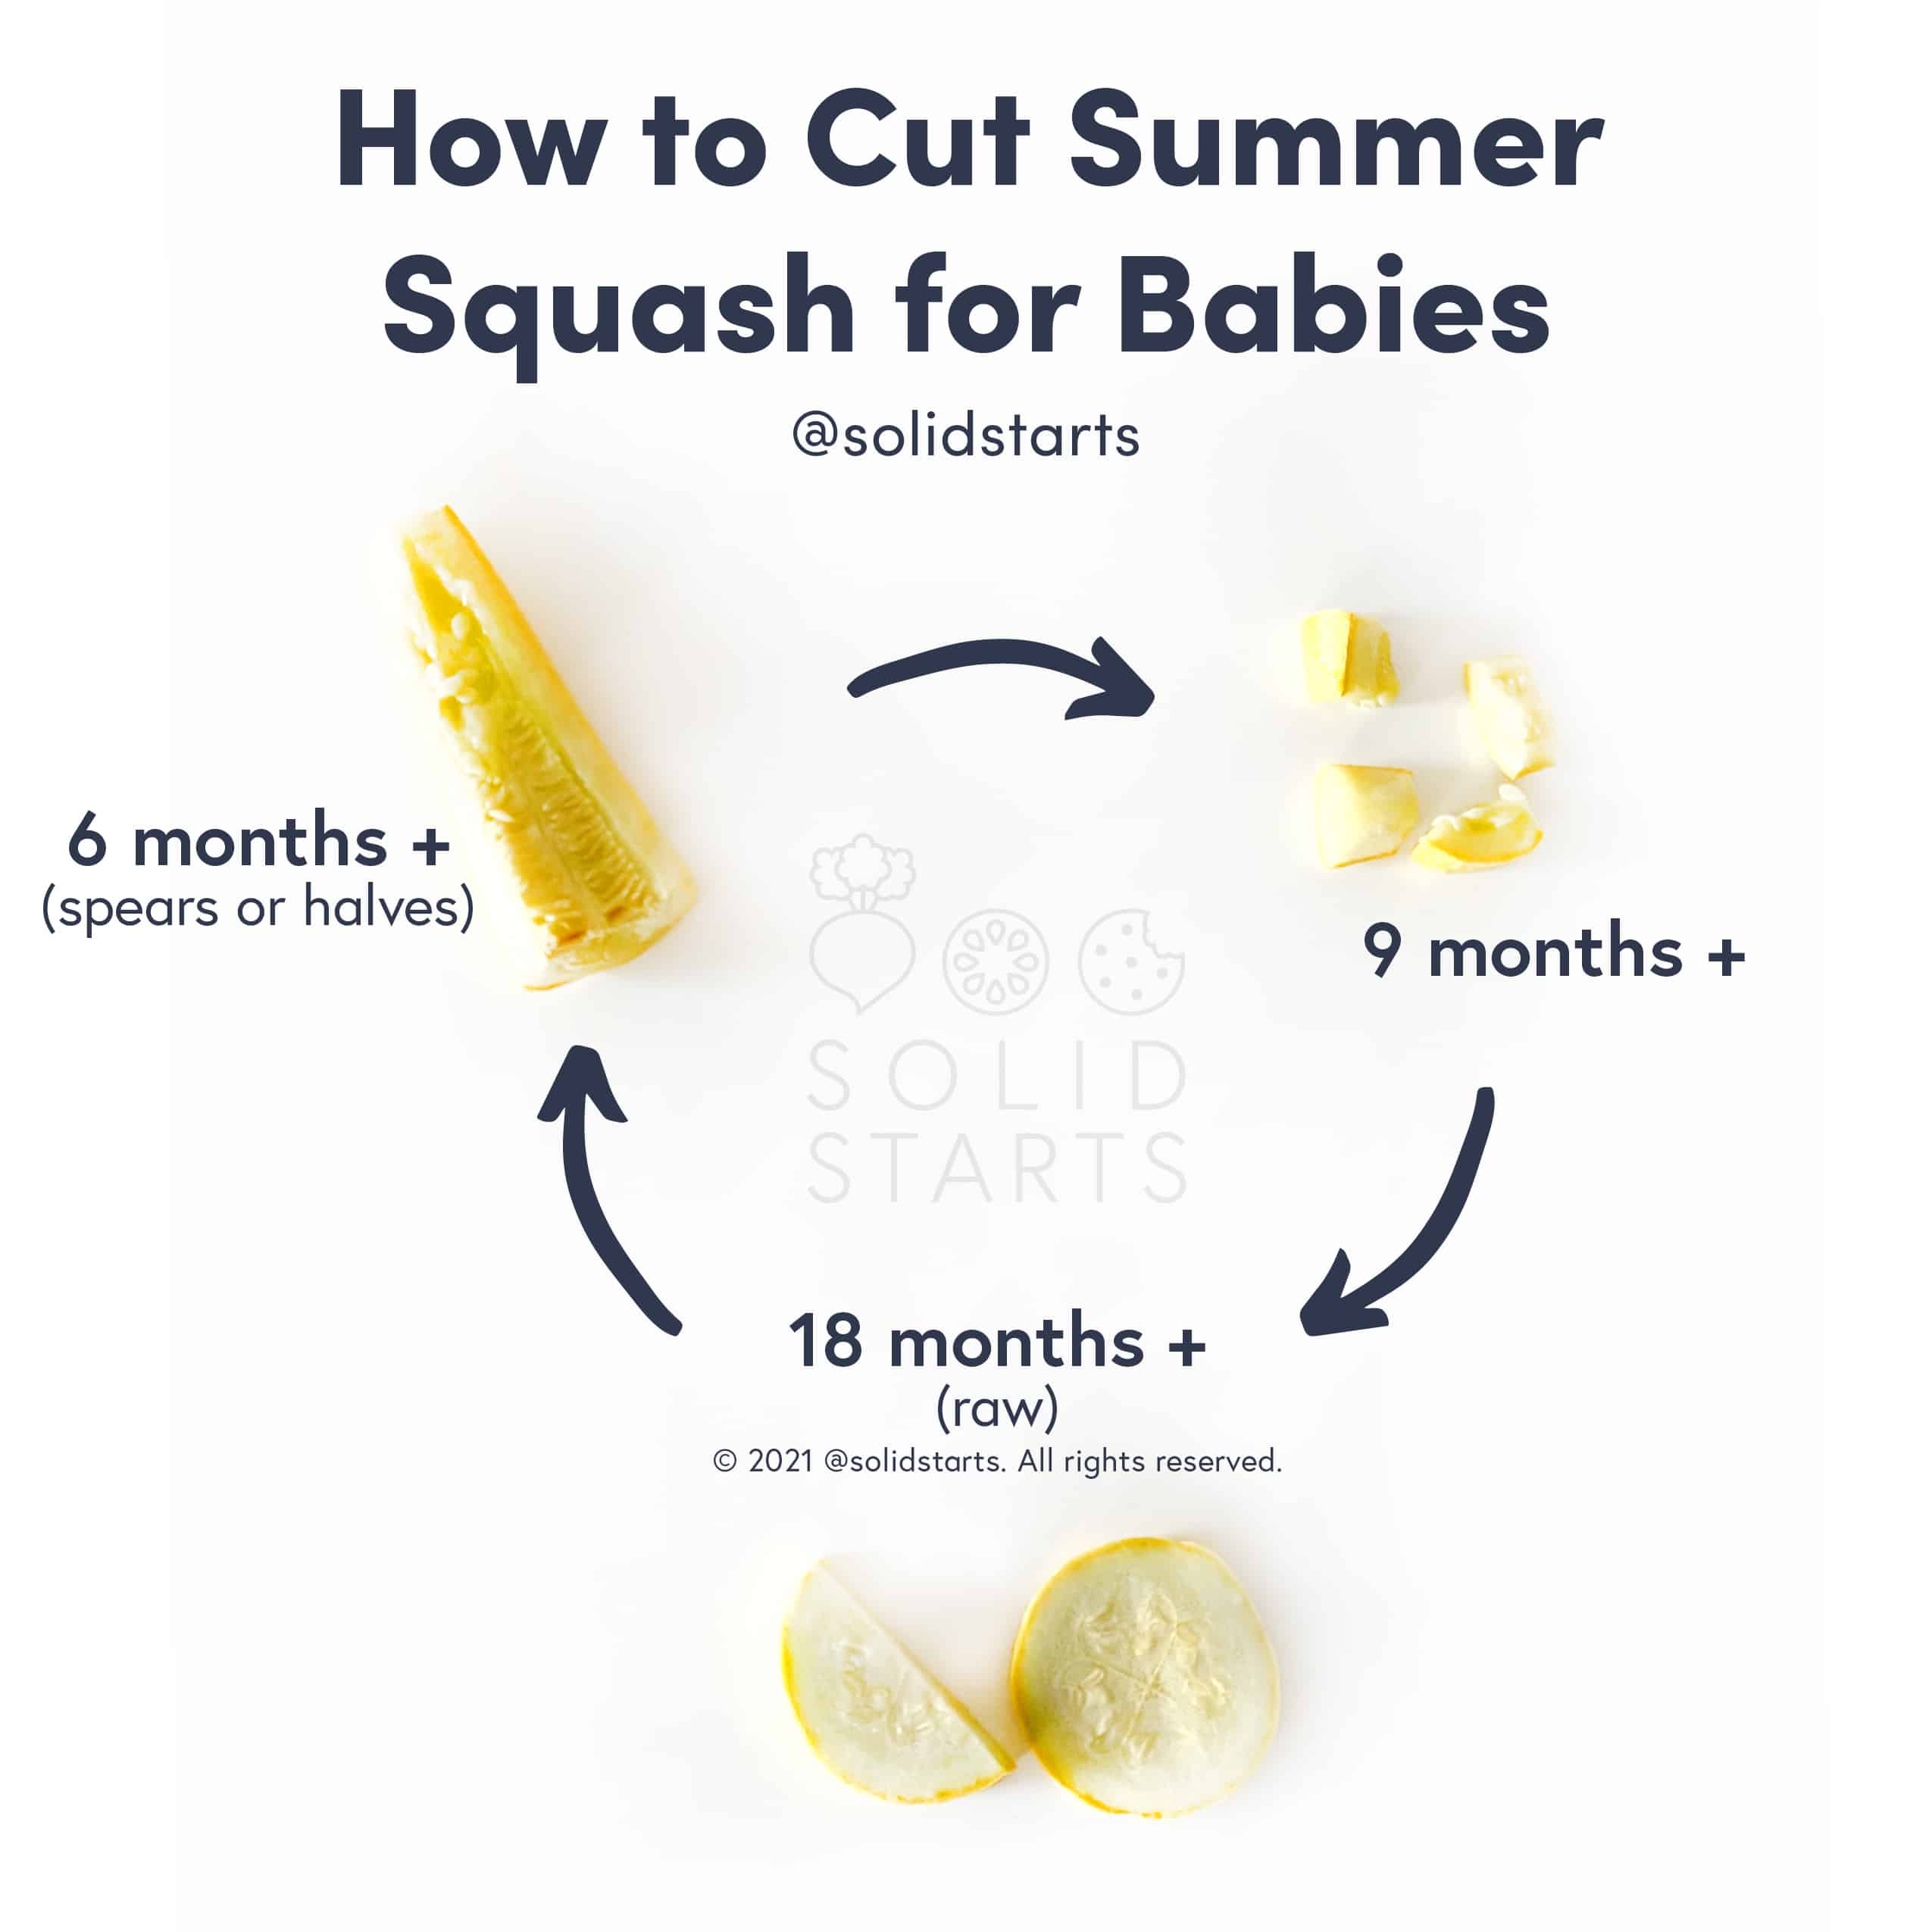 can i give zucchini to my 6 month old baby